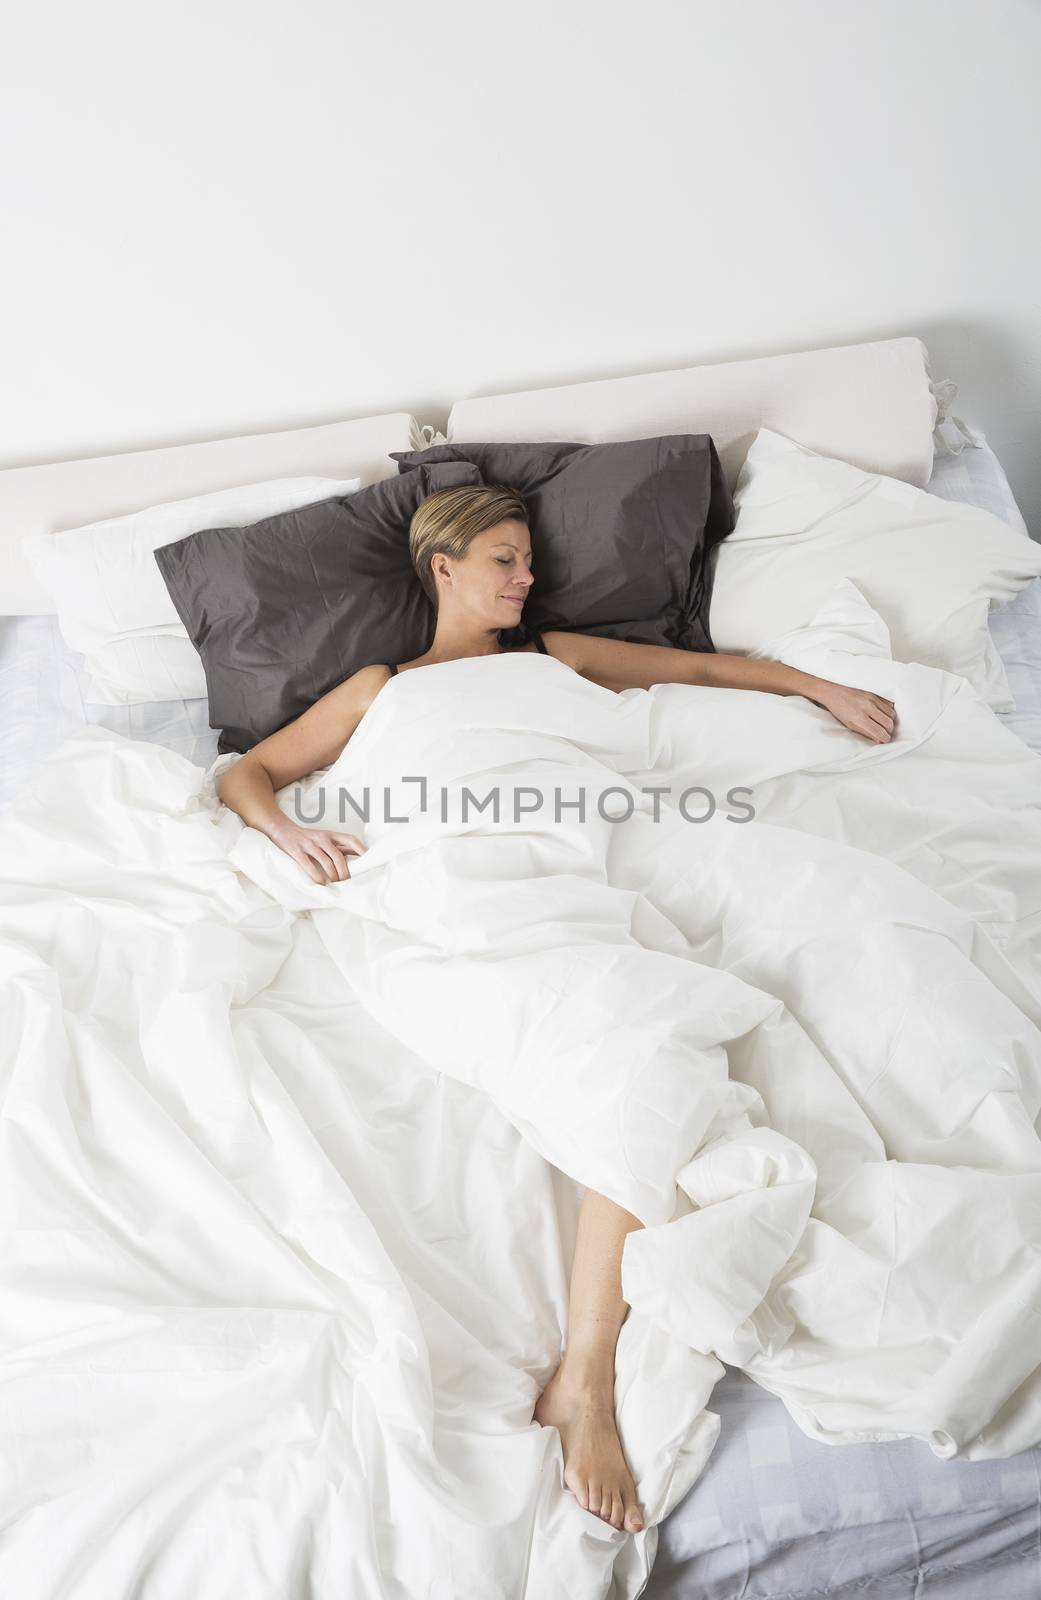 Woman sleeping in a white bedroom environment from high angle view